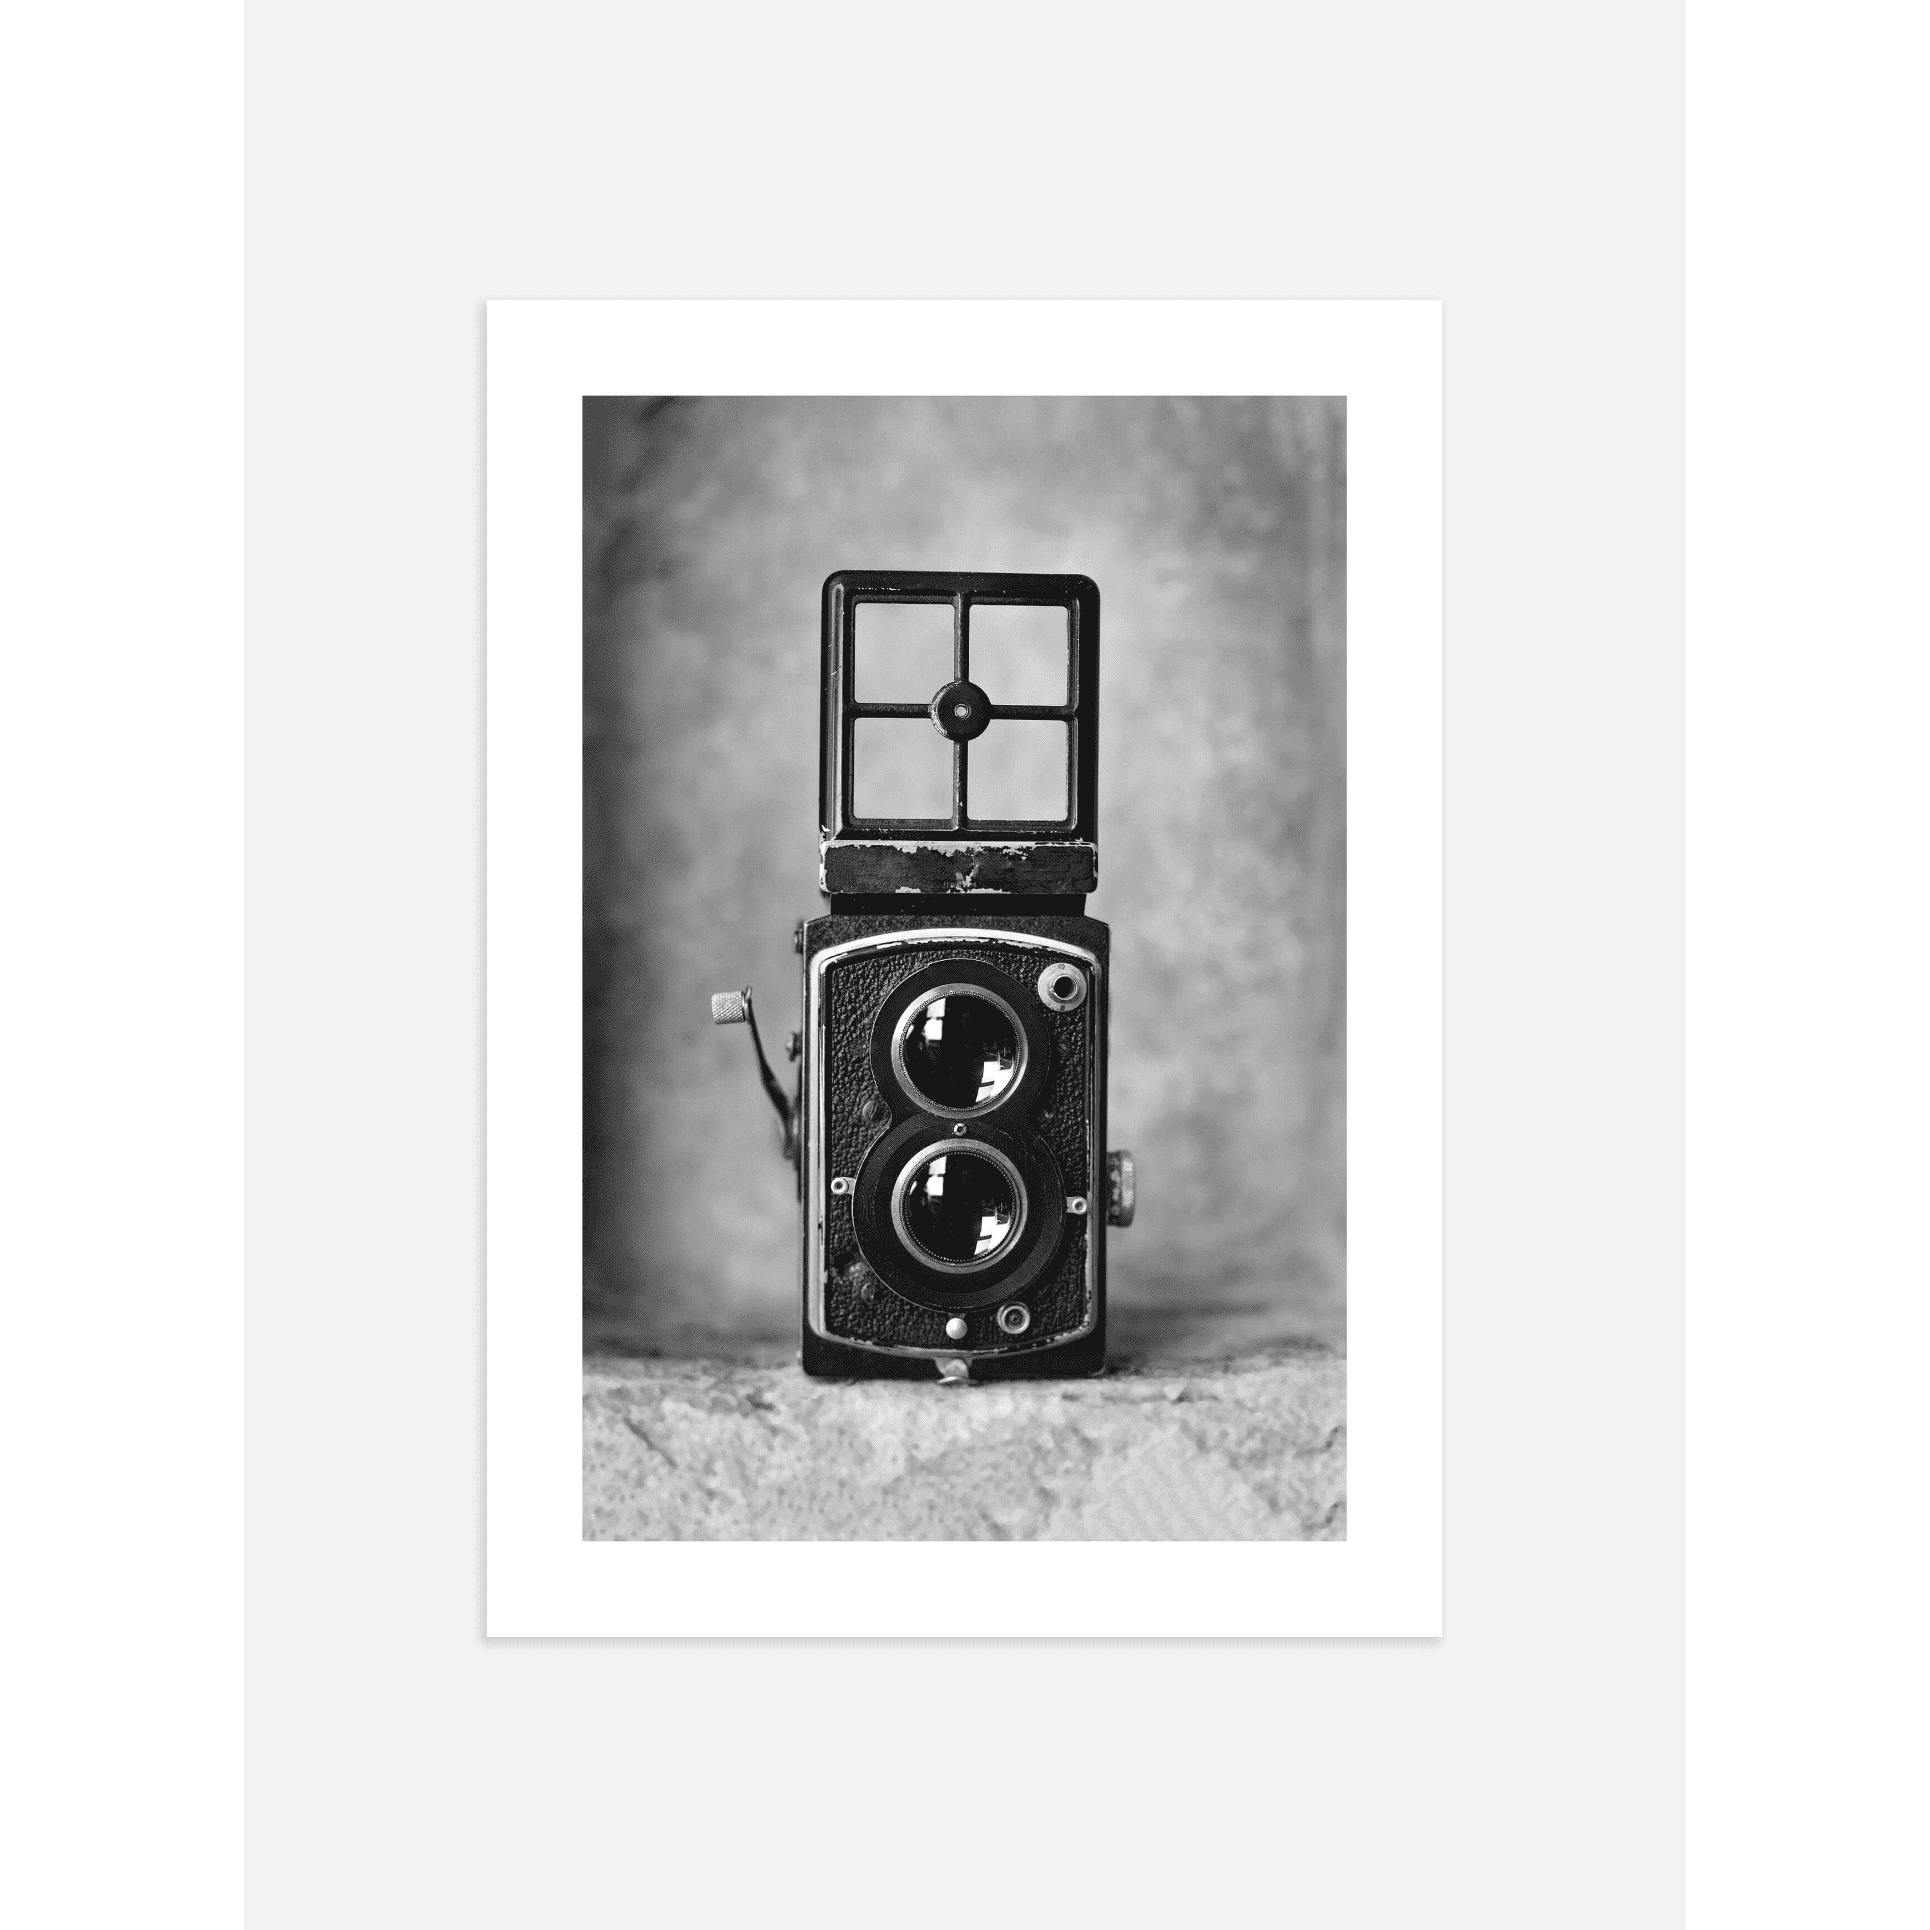 Set of 6 Black & White Gallery Wall